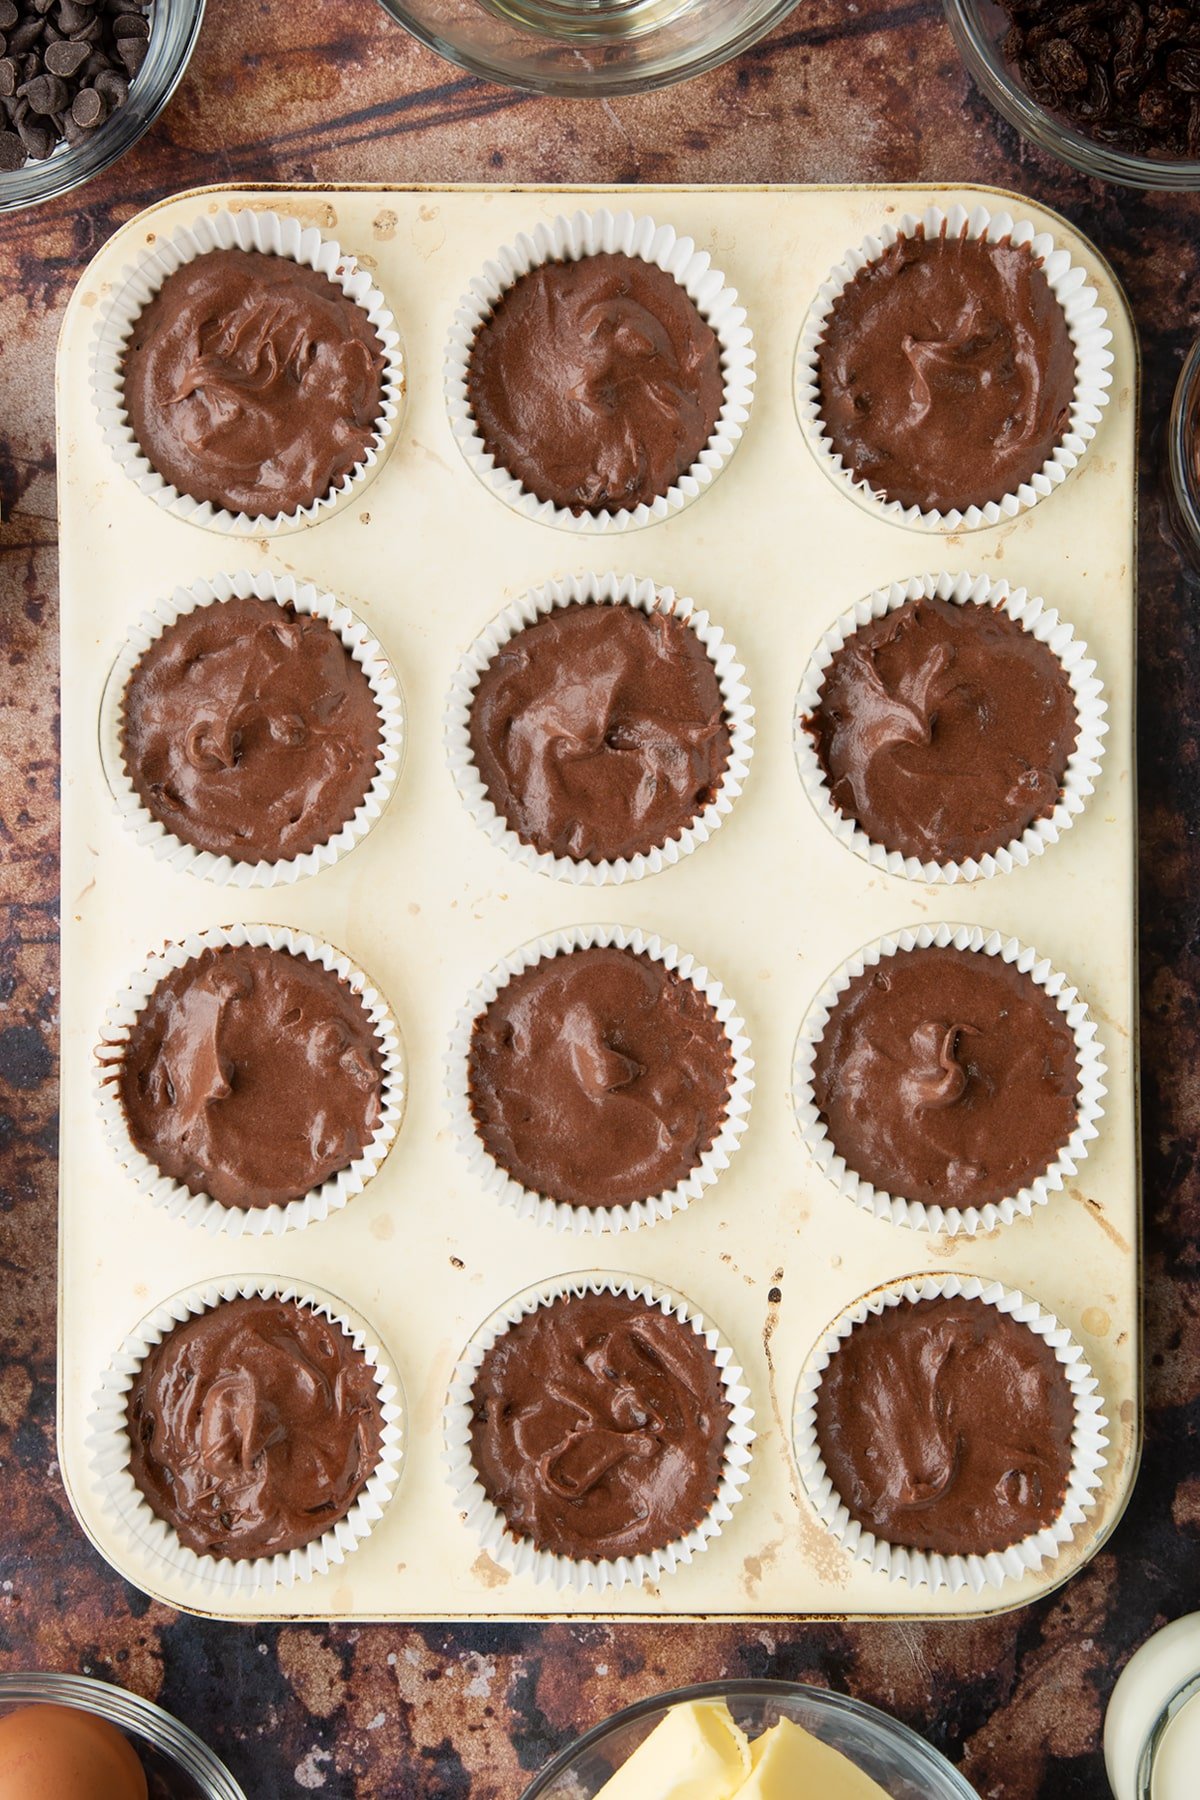 Chocolate raisin muffin batter in cupcake cases in a tray.